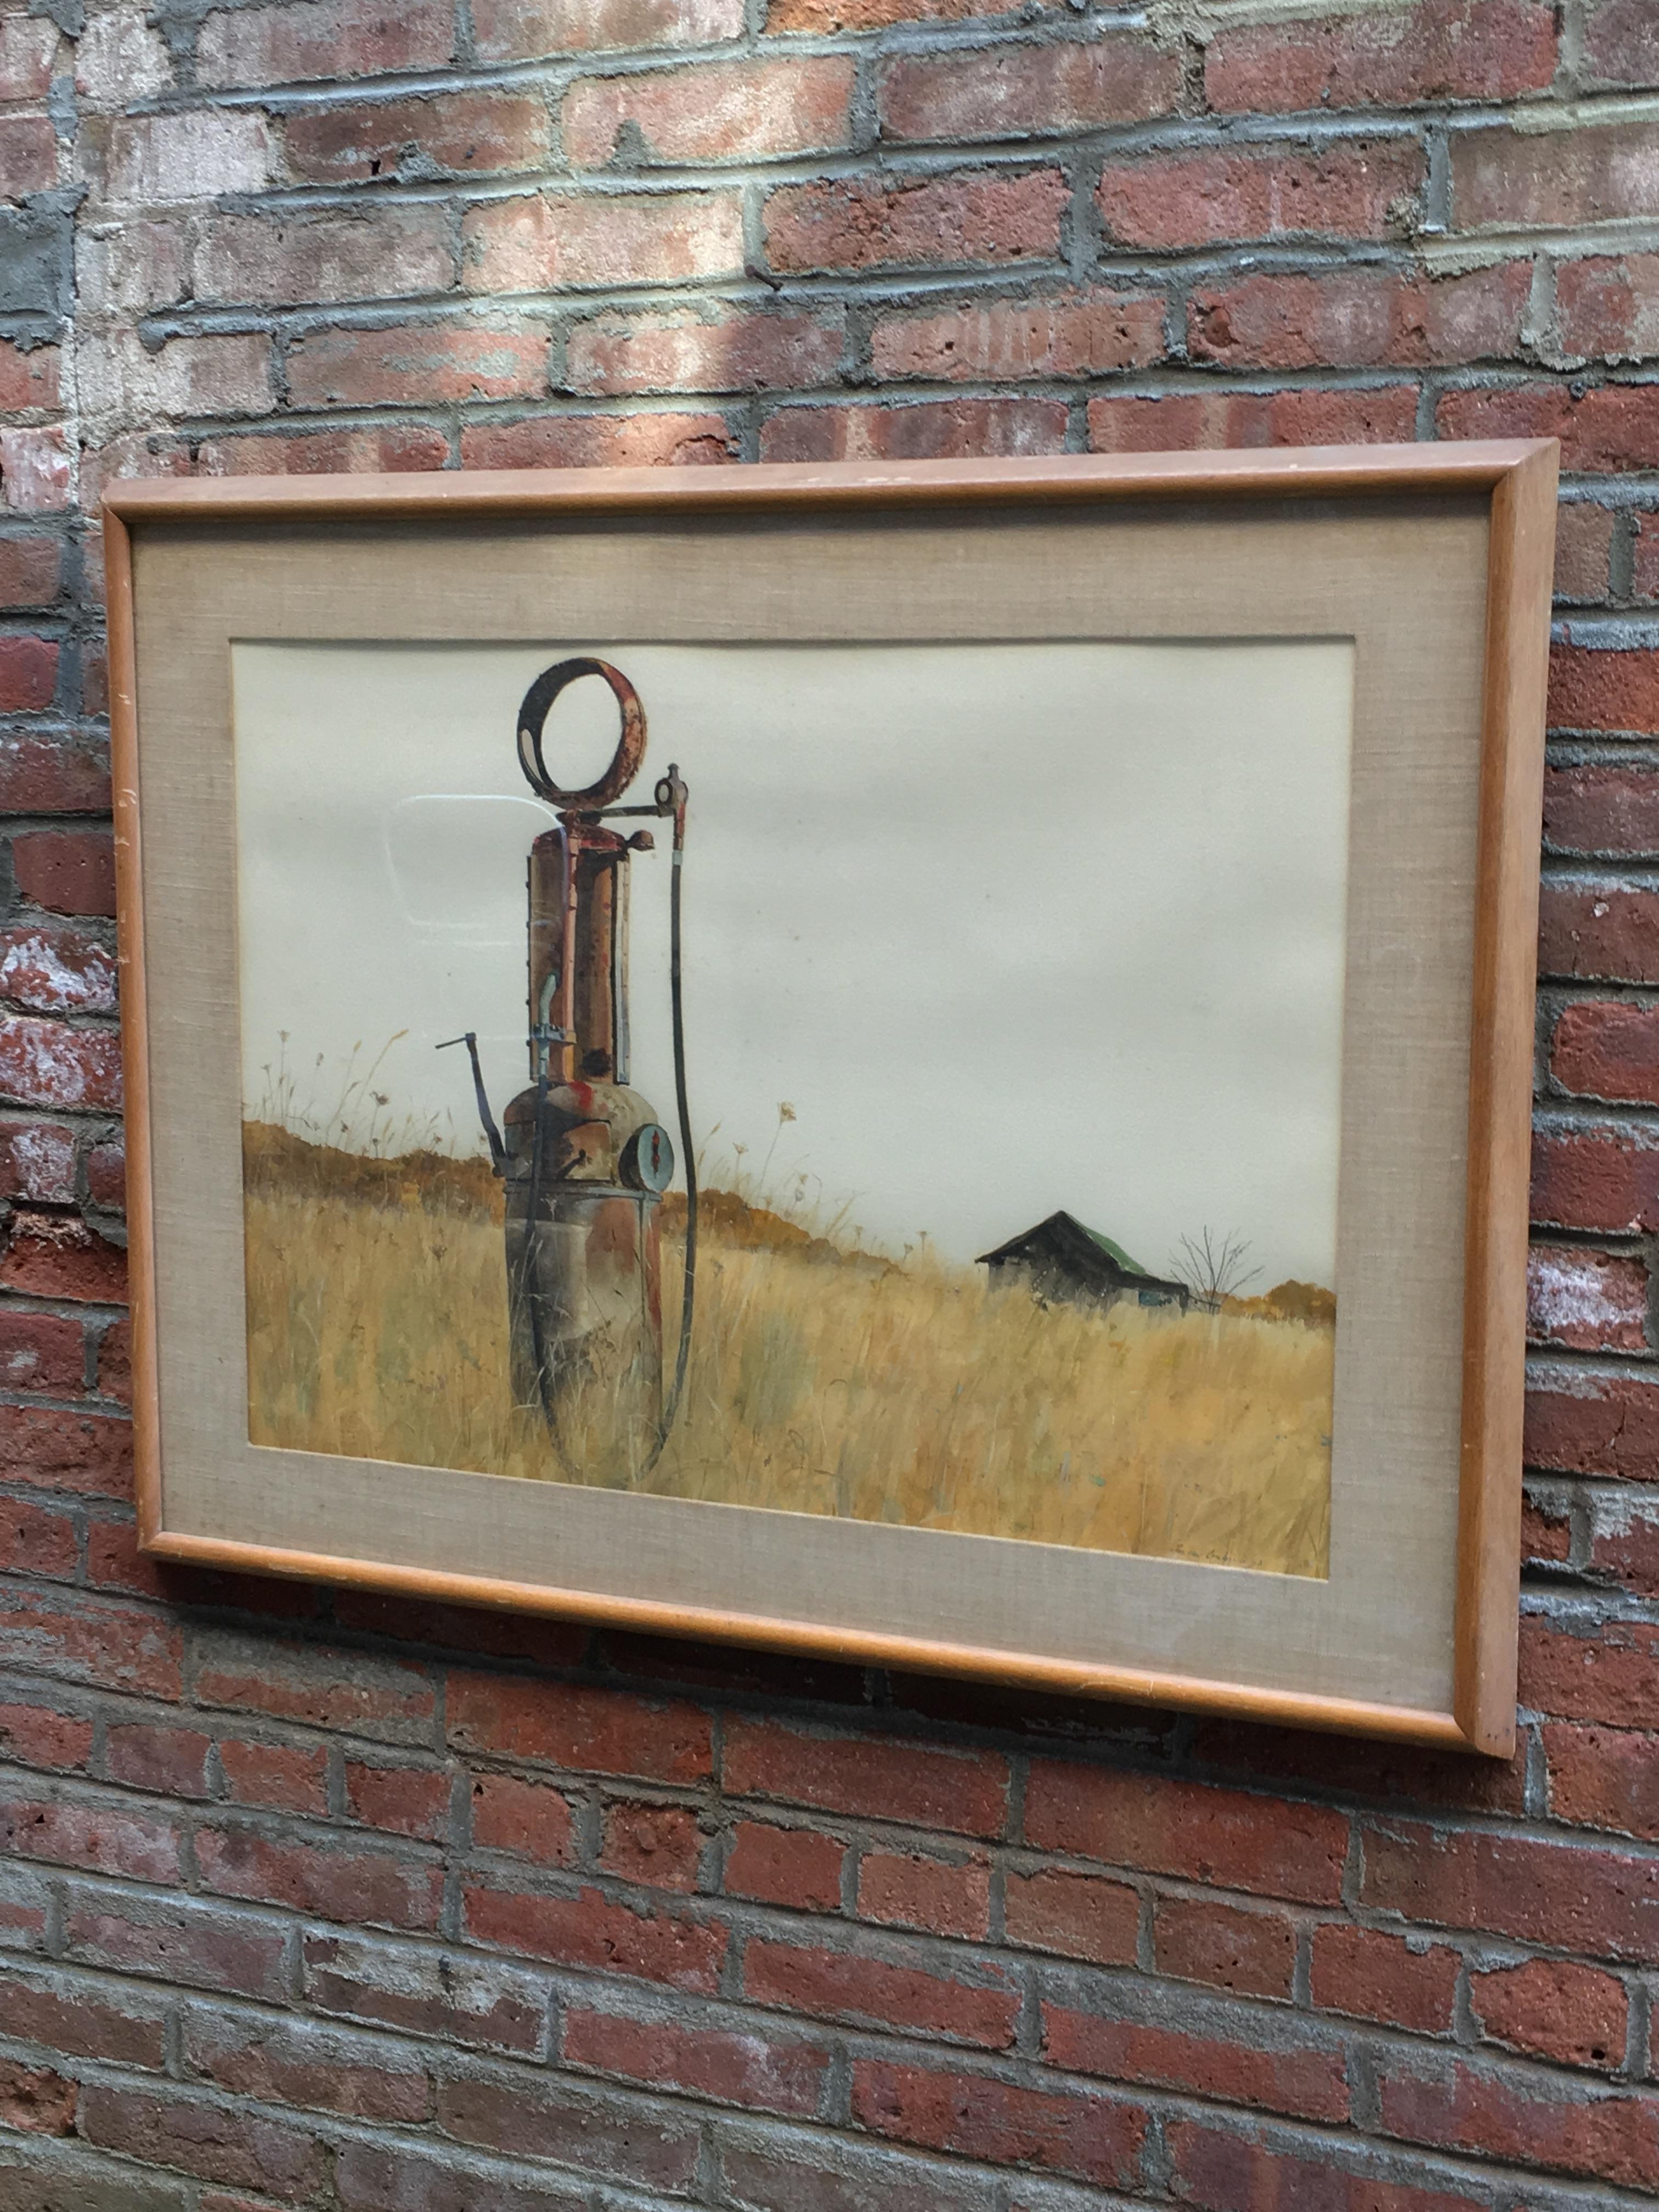 Conlon's work is reminiscent of Andrew Wyeth's regional style of Christina's World and Public Sale. Wonderfully detailed and painted with peaceful clarity. Signed lower right, Eugene Conlon, 63. Watercolor on paper.

The framing treatment consists